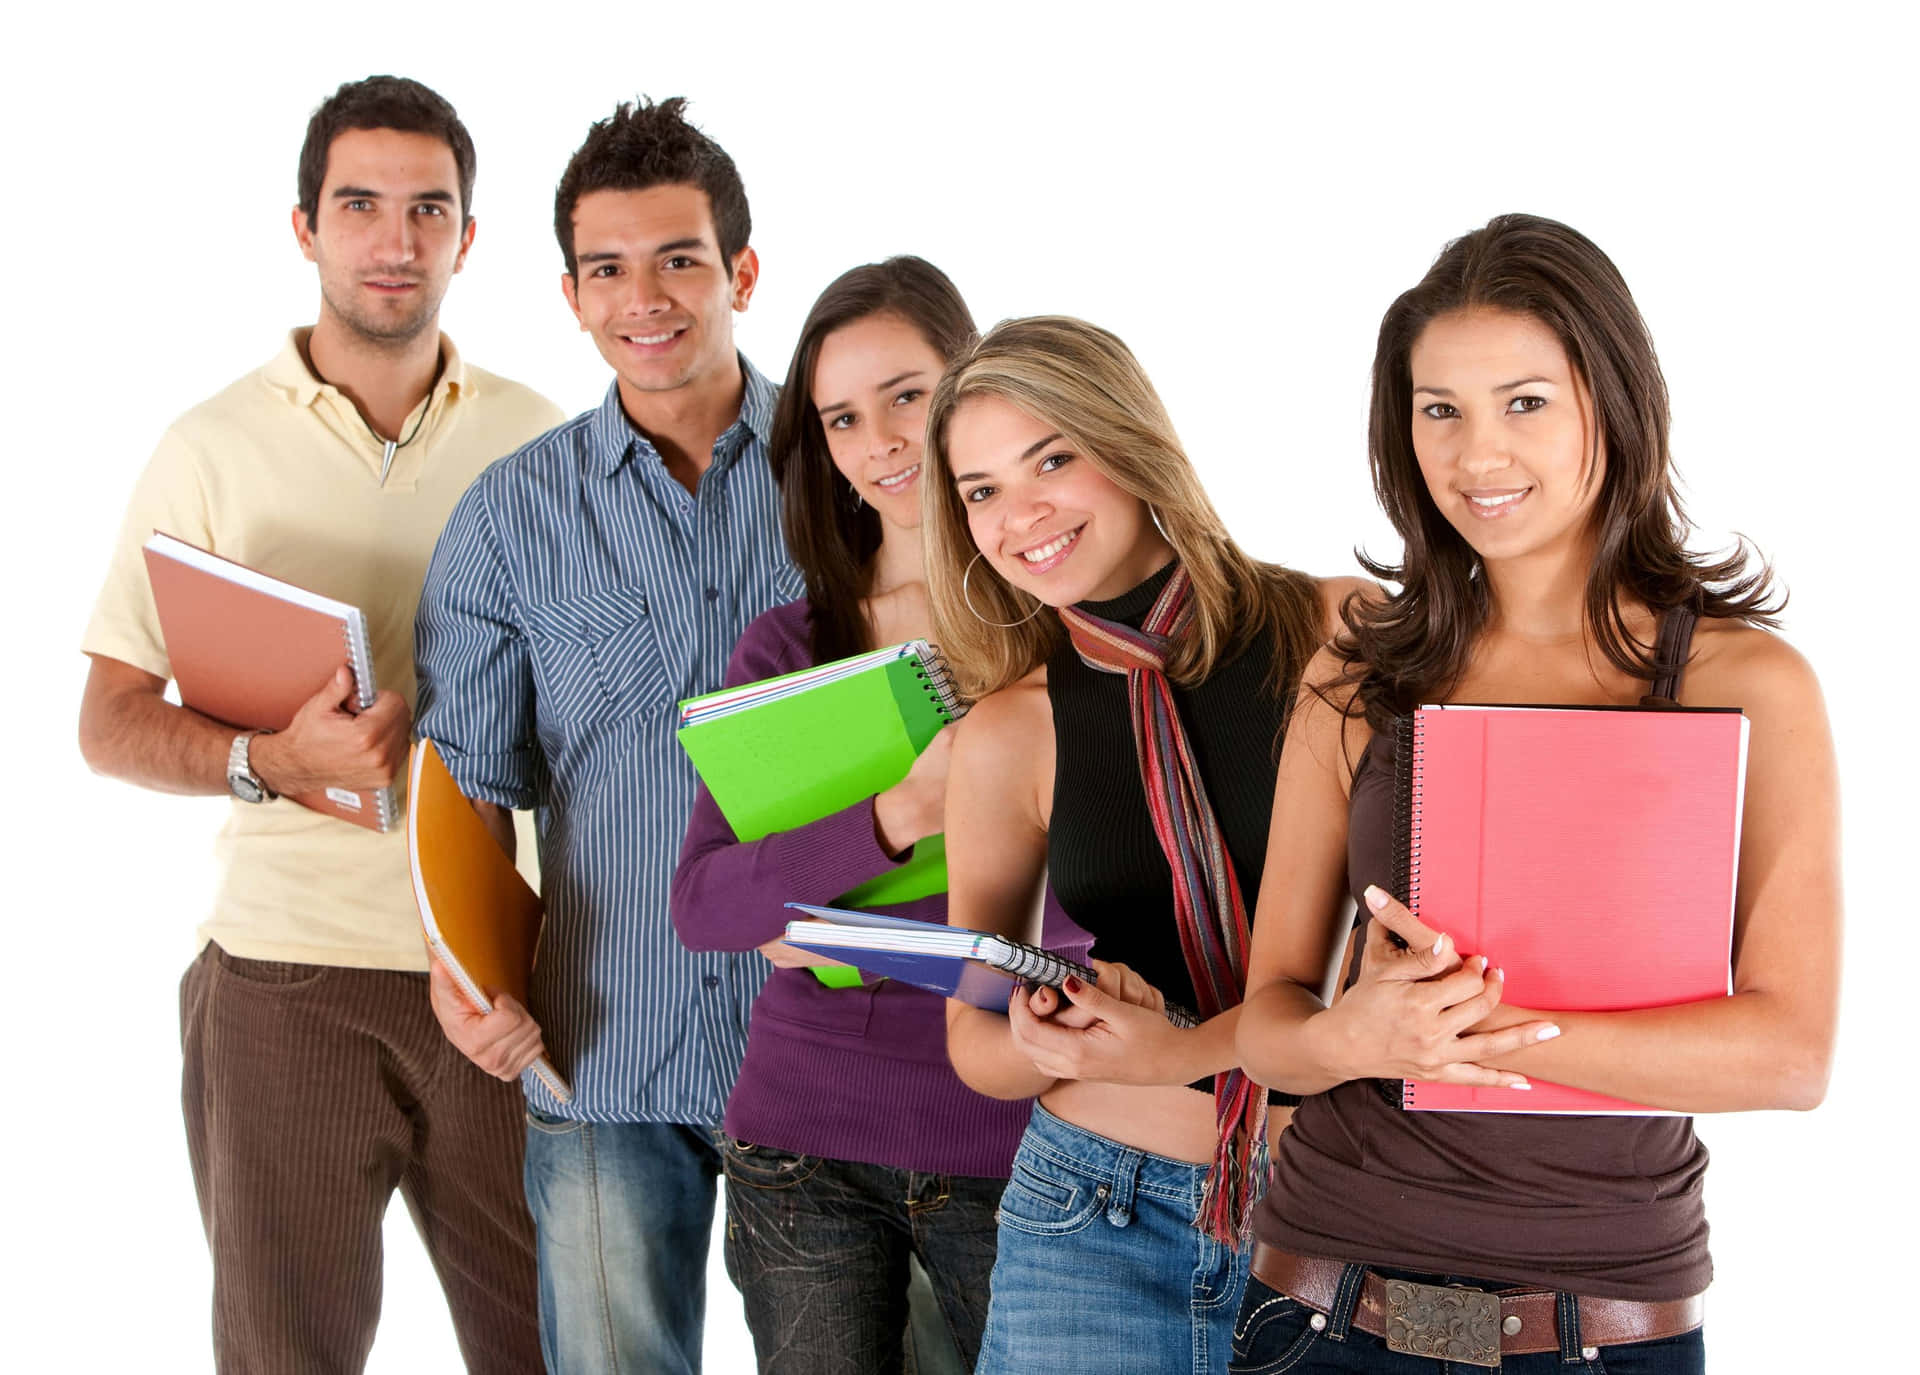 Groupof Students Posing With Books.jpg Background